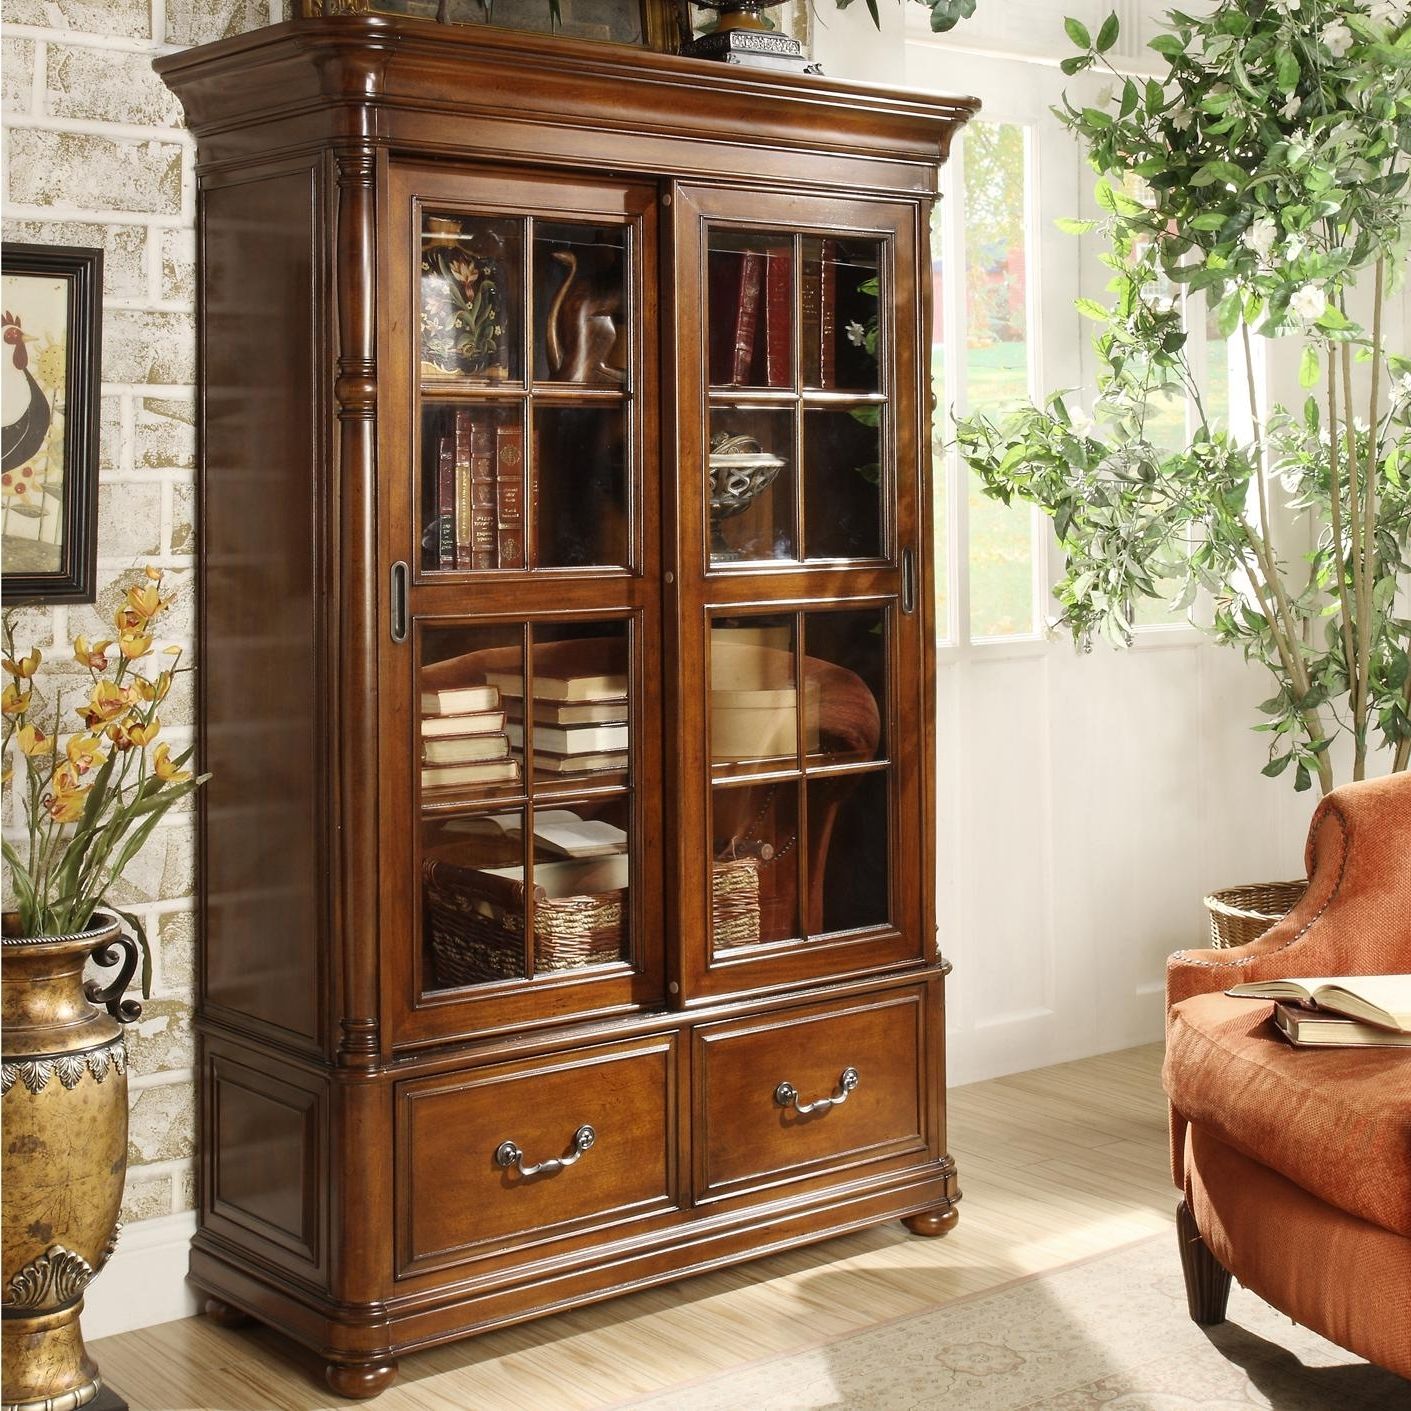 Well Liked Traditional Bookshelves Throughout Furniture (View 12 of 15)